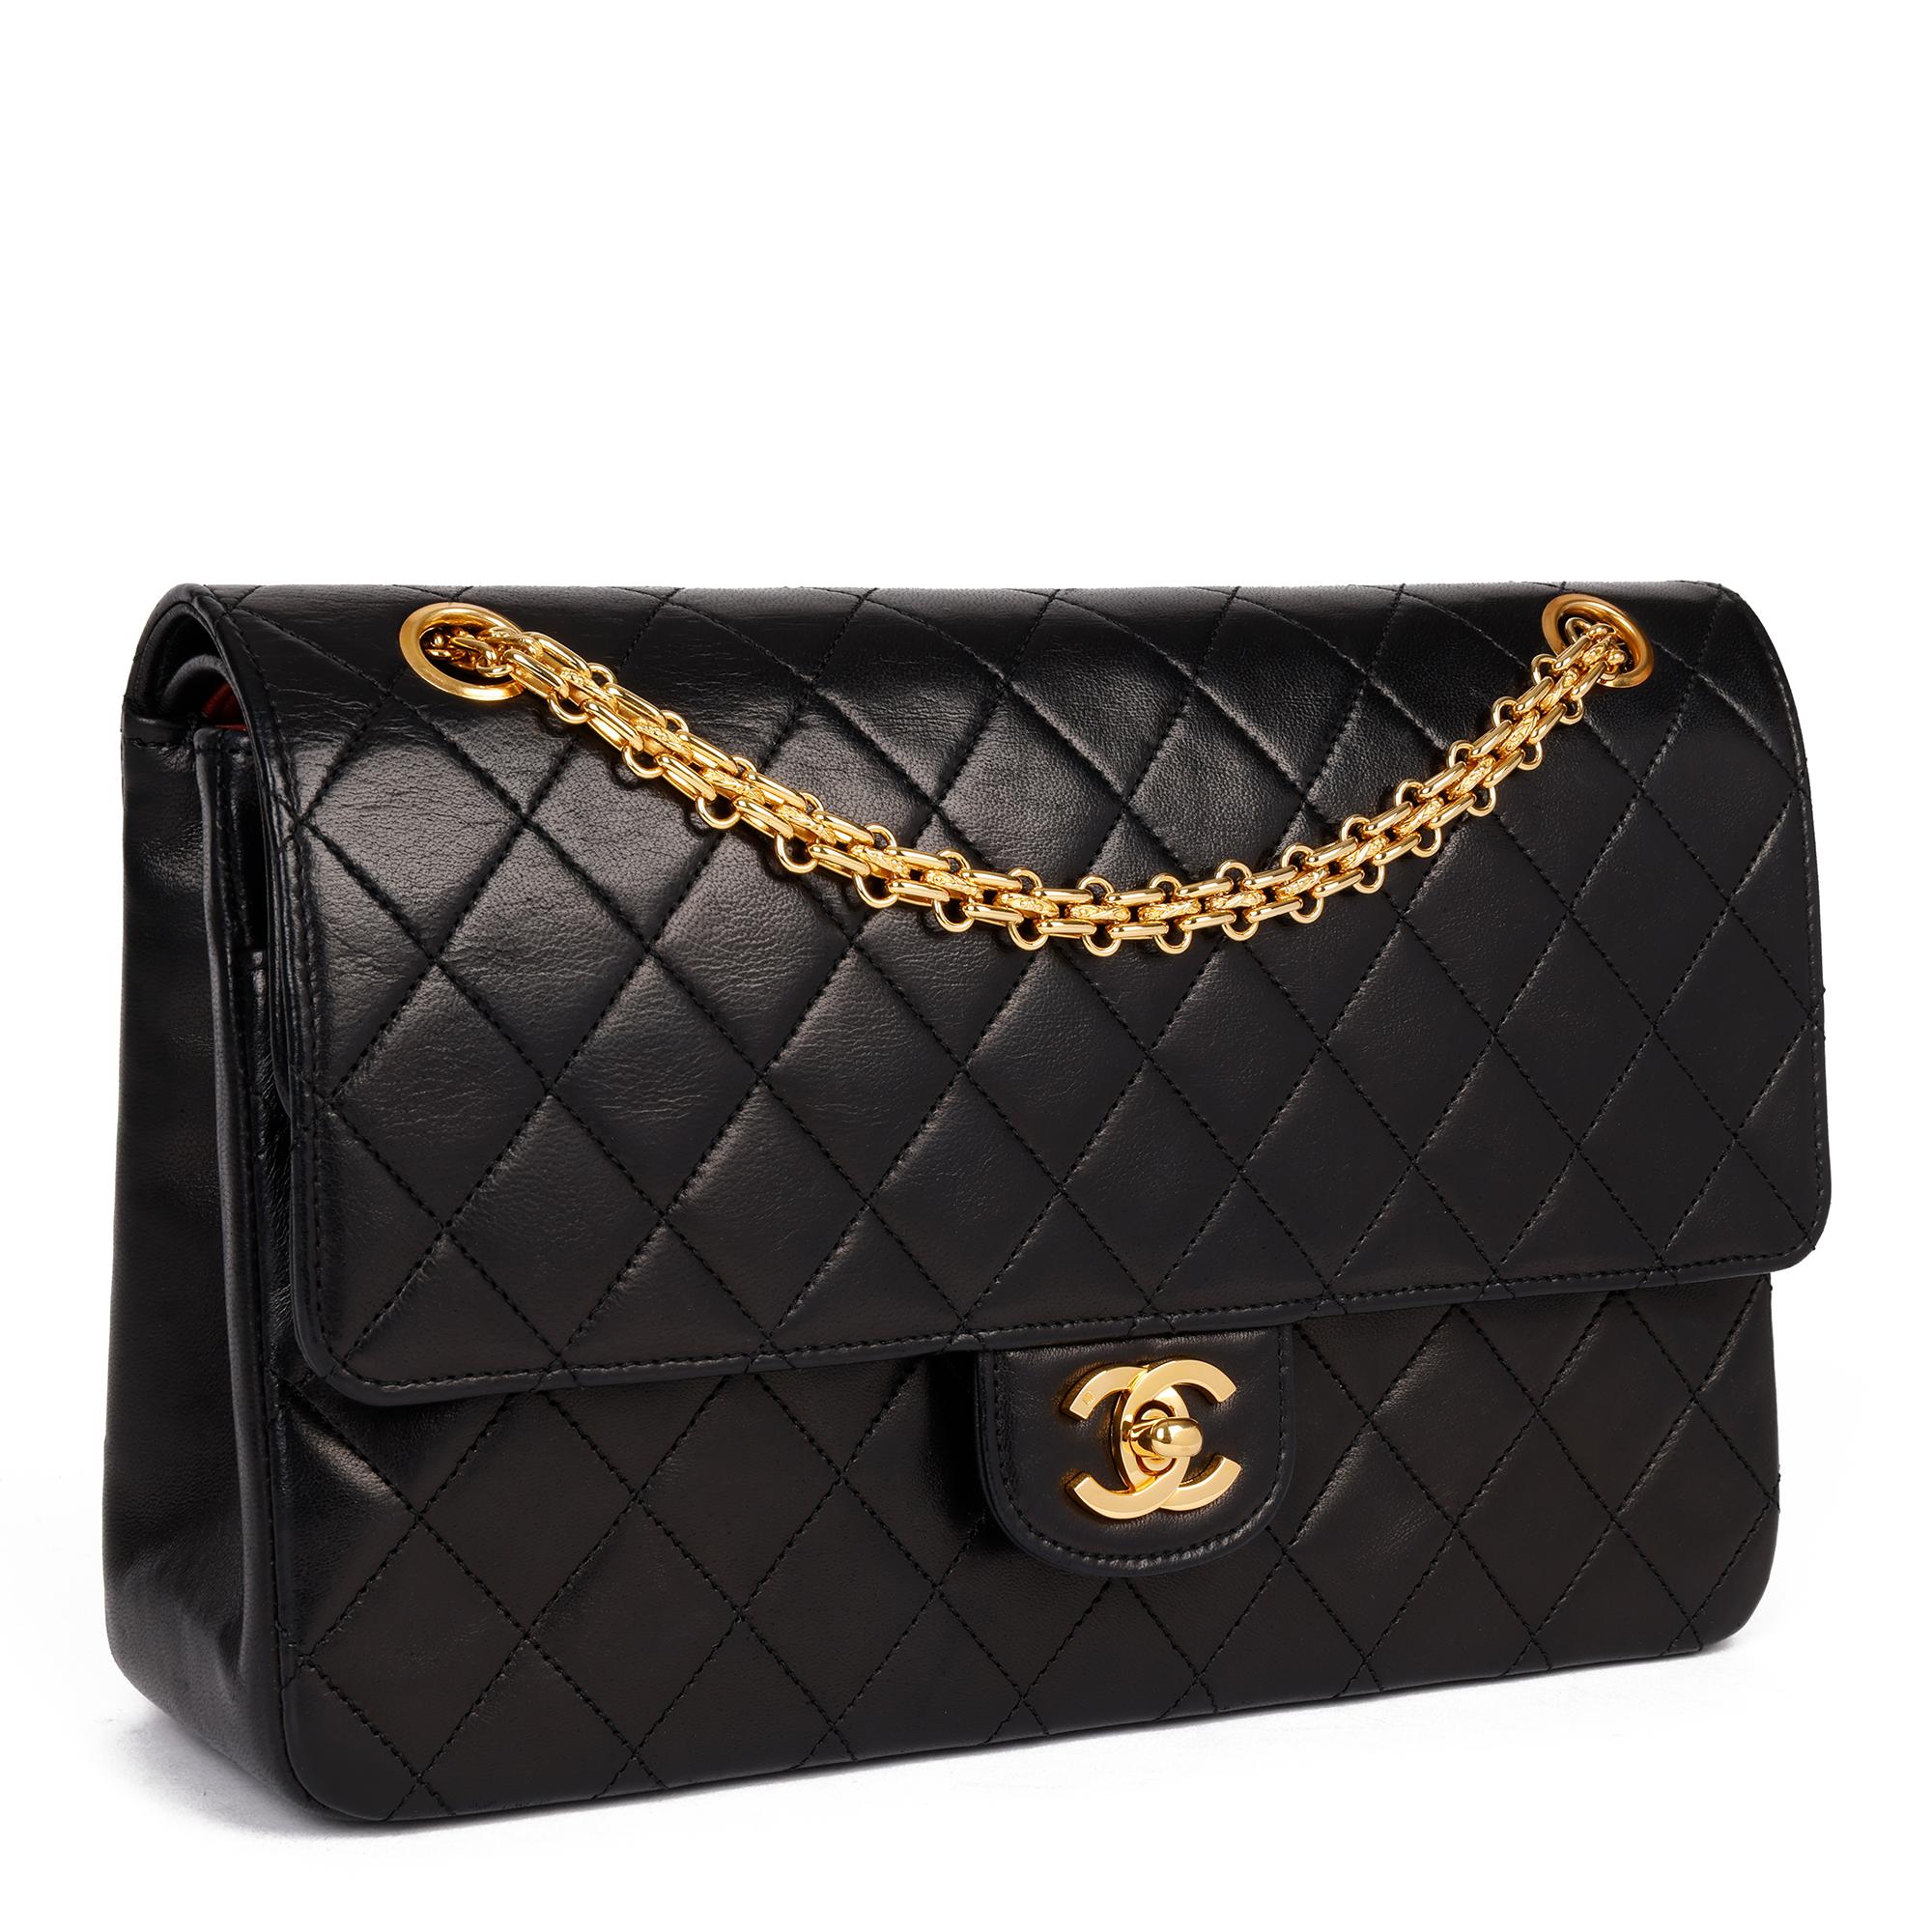 CHANEL
Black Quilted Lambskin Leather Vintage Classic Double Flap Bag

Xupes Reference: HB3906
Serial Number: 566653
Age (Circa): 1999
Accompanied By: Chanel Dust Bag, Box
Authenticity Details: Serial Sticker (Made in France) 
Gender: Ladies
Type: